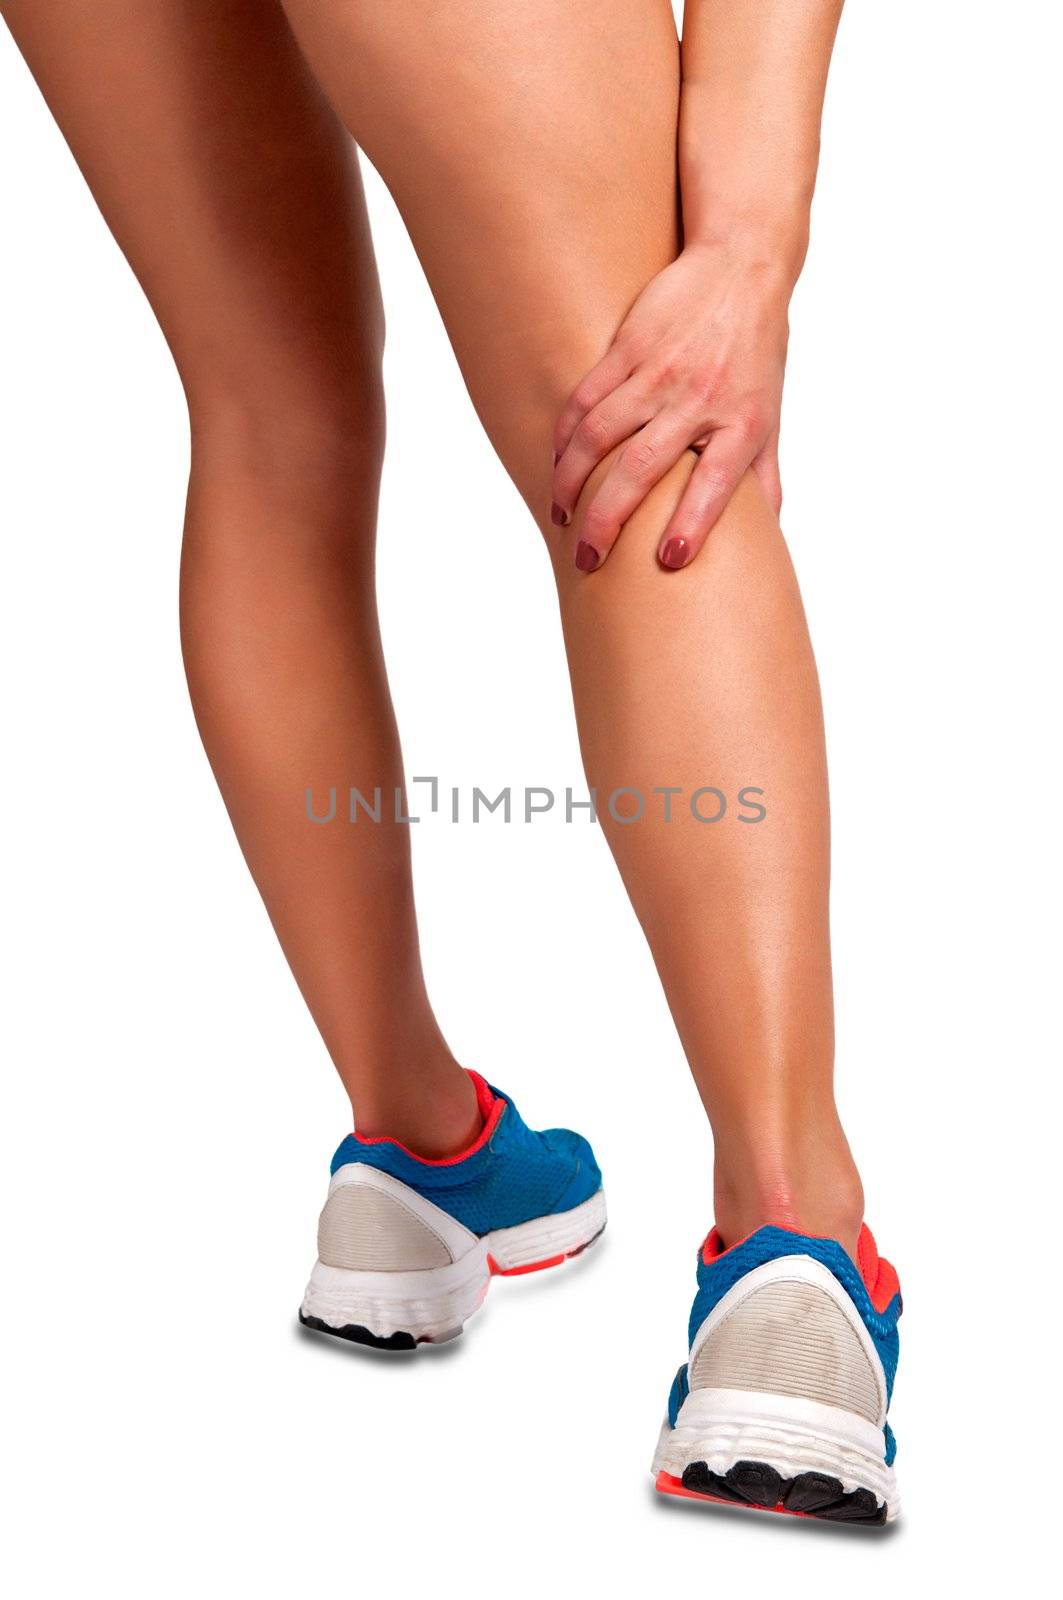 Female jogger with pain in her lower leg, isolated in white